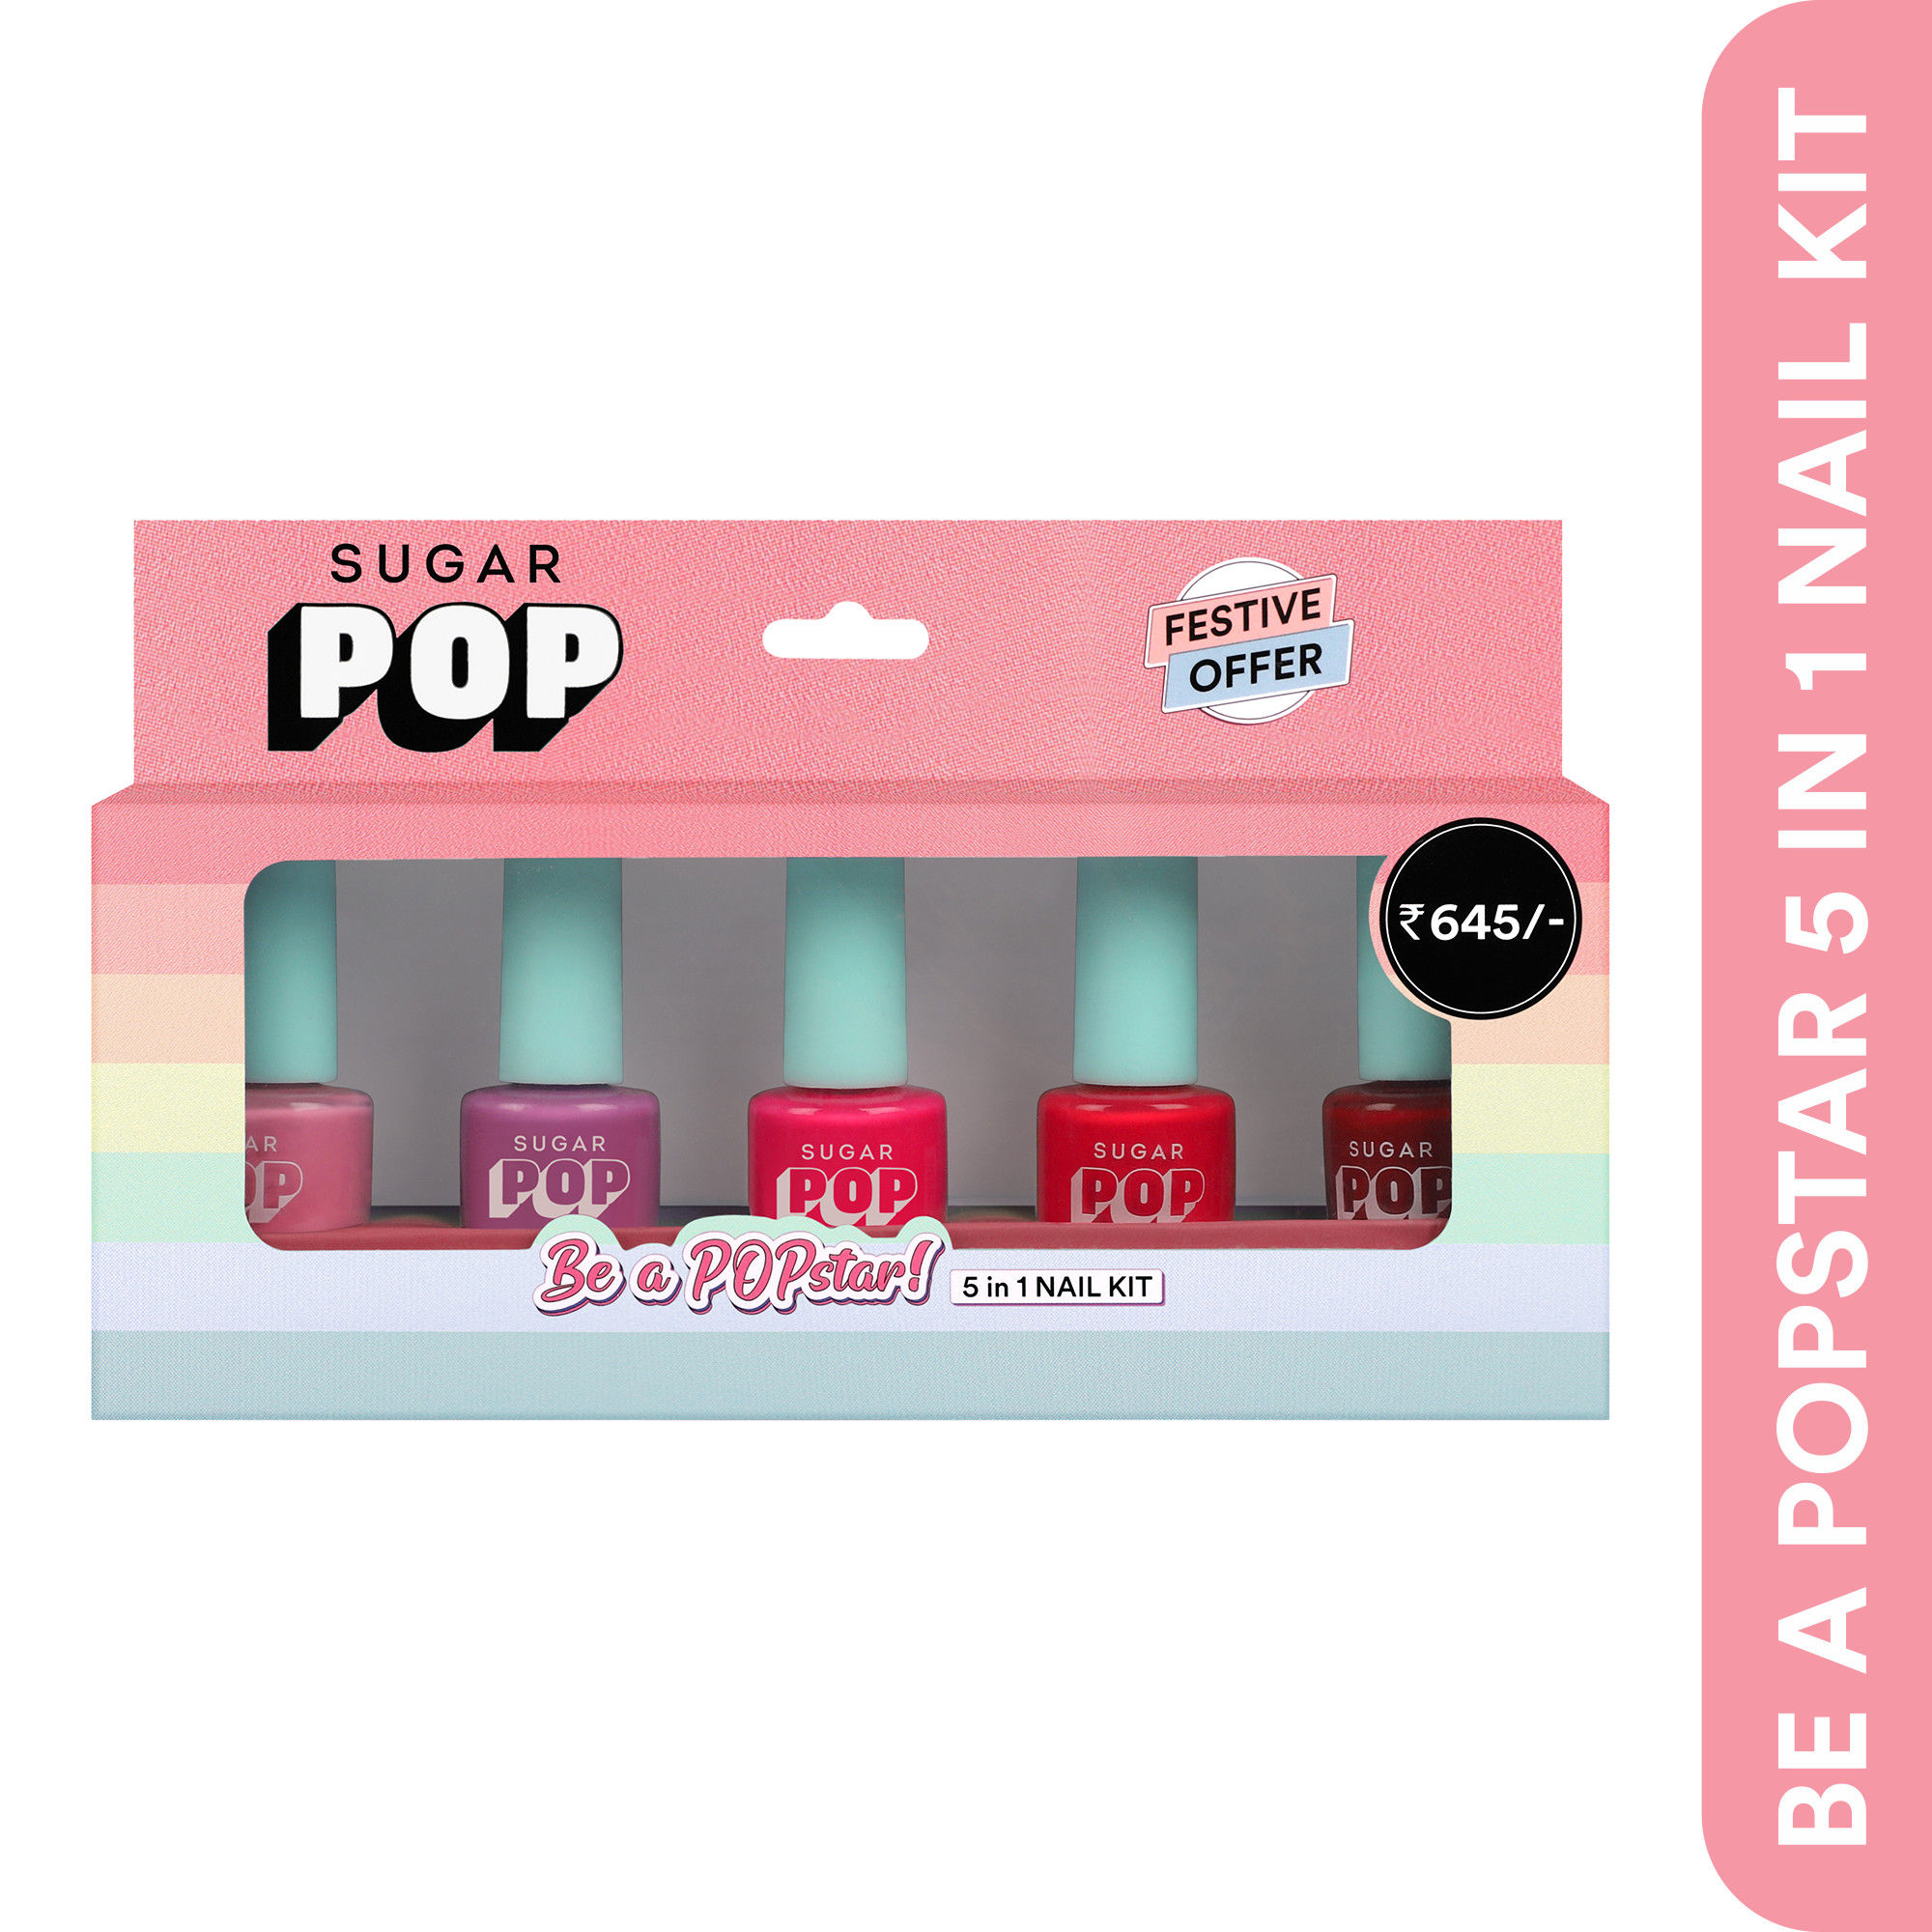 Sugar Pop Nail Lacquer - 03 Aqua Babe (Ice Blue) - 10 Ml - Dries In 45  Seconds - Quick-Drying, Chip-Resistant, Long-Lasting. Glossy High Shine Nail  Enamel/Polish For Women. - Walmart.com